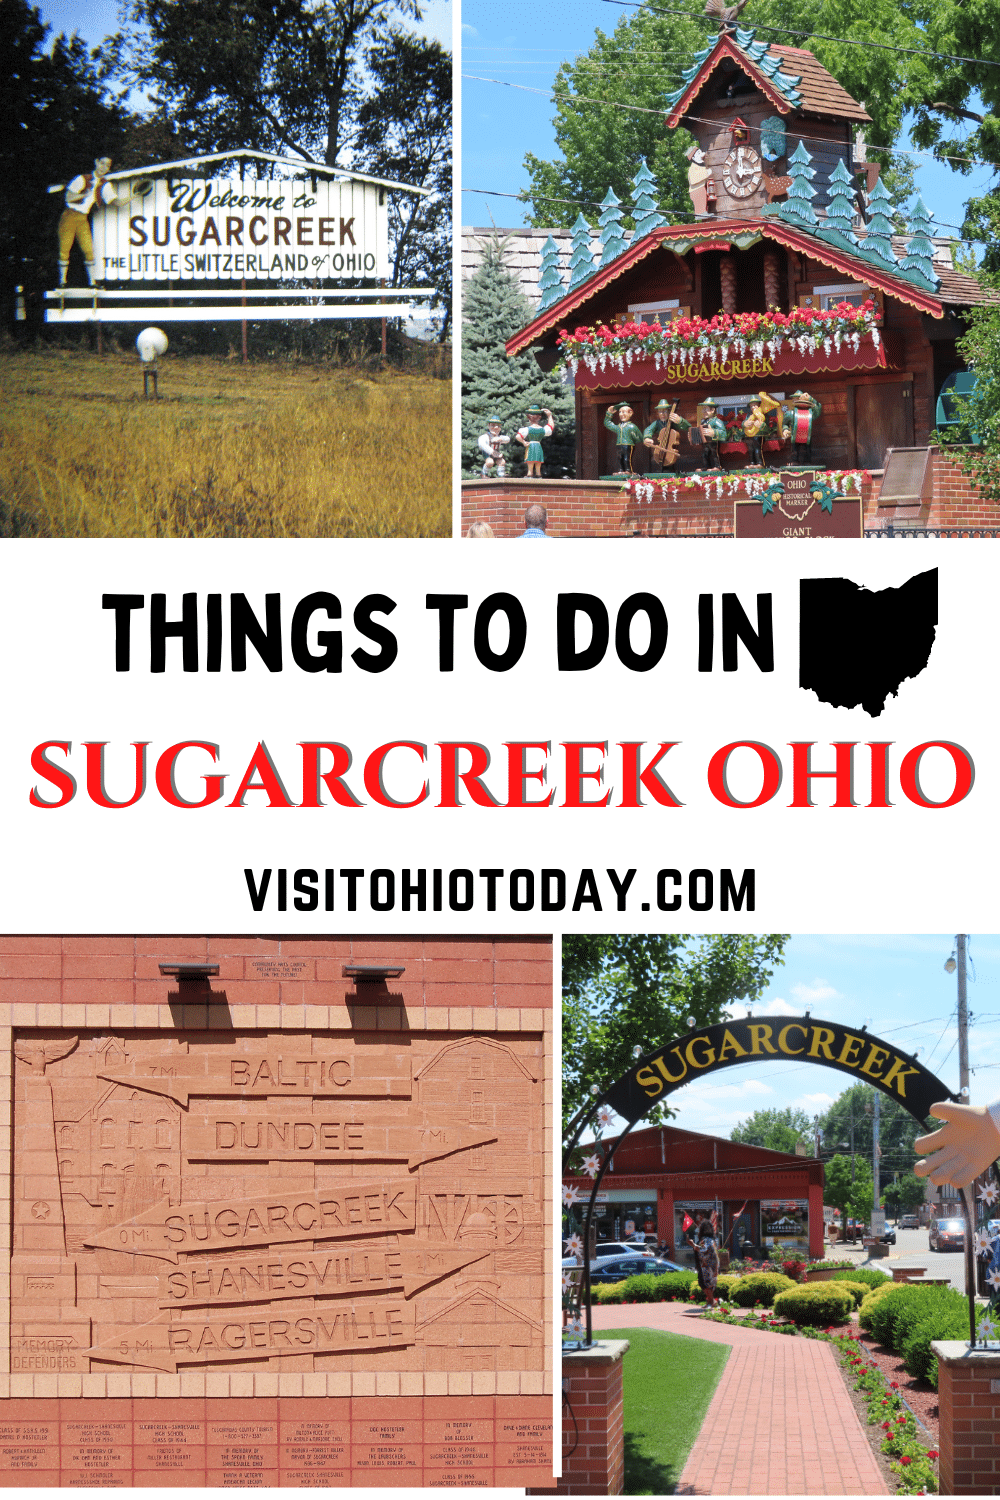 Sugarcreek is a small community that is based in Tuscarawas County, Ohio. This area is in the middle of Amish country and it is also known as “Little Switzerland”. There are lots of things to do in Sugarcreek Ohio.